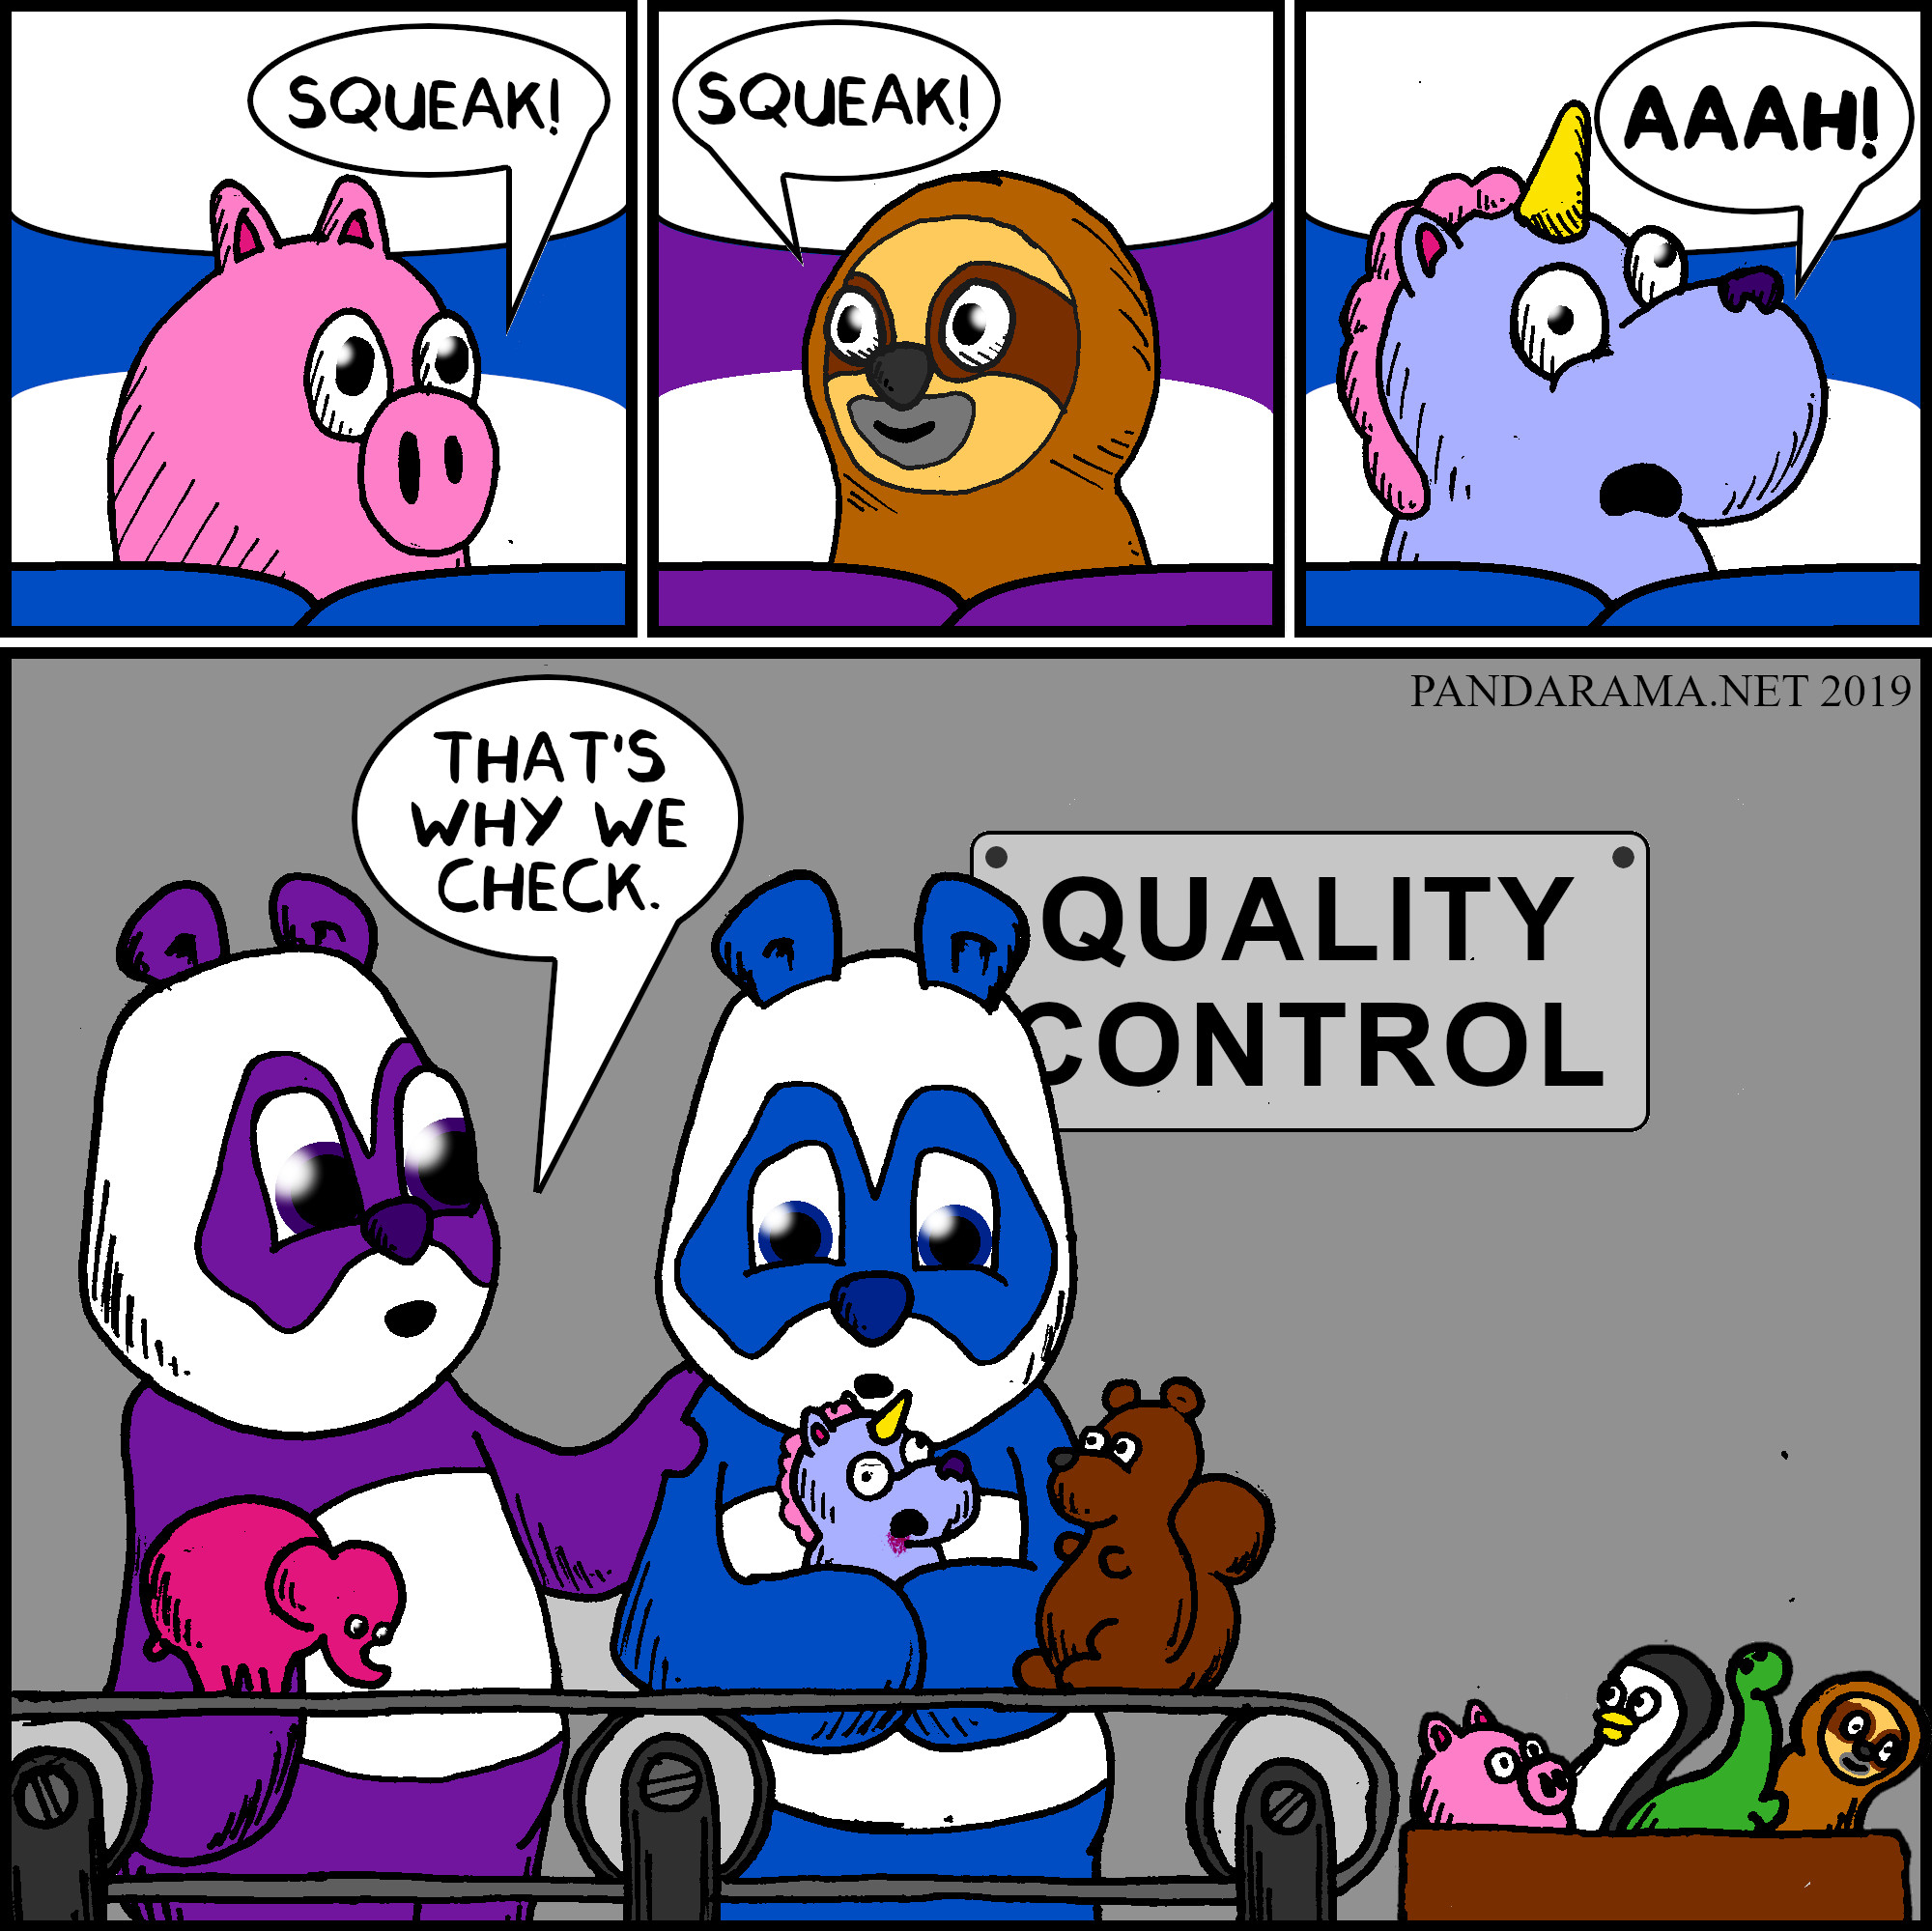 webcomic. one toy screams in squeaky toy quality control.